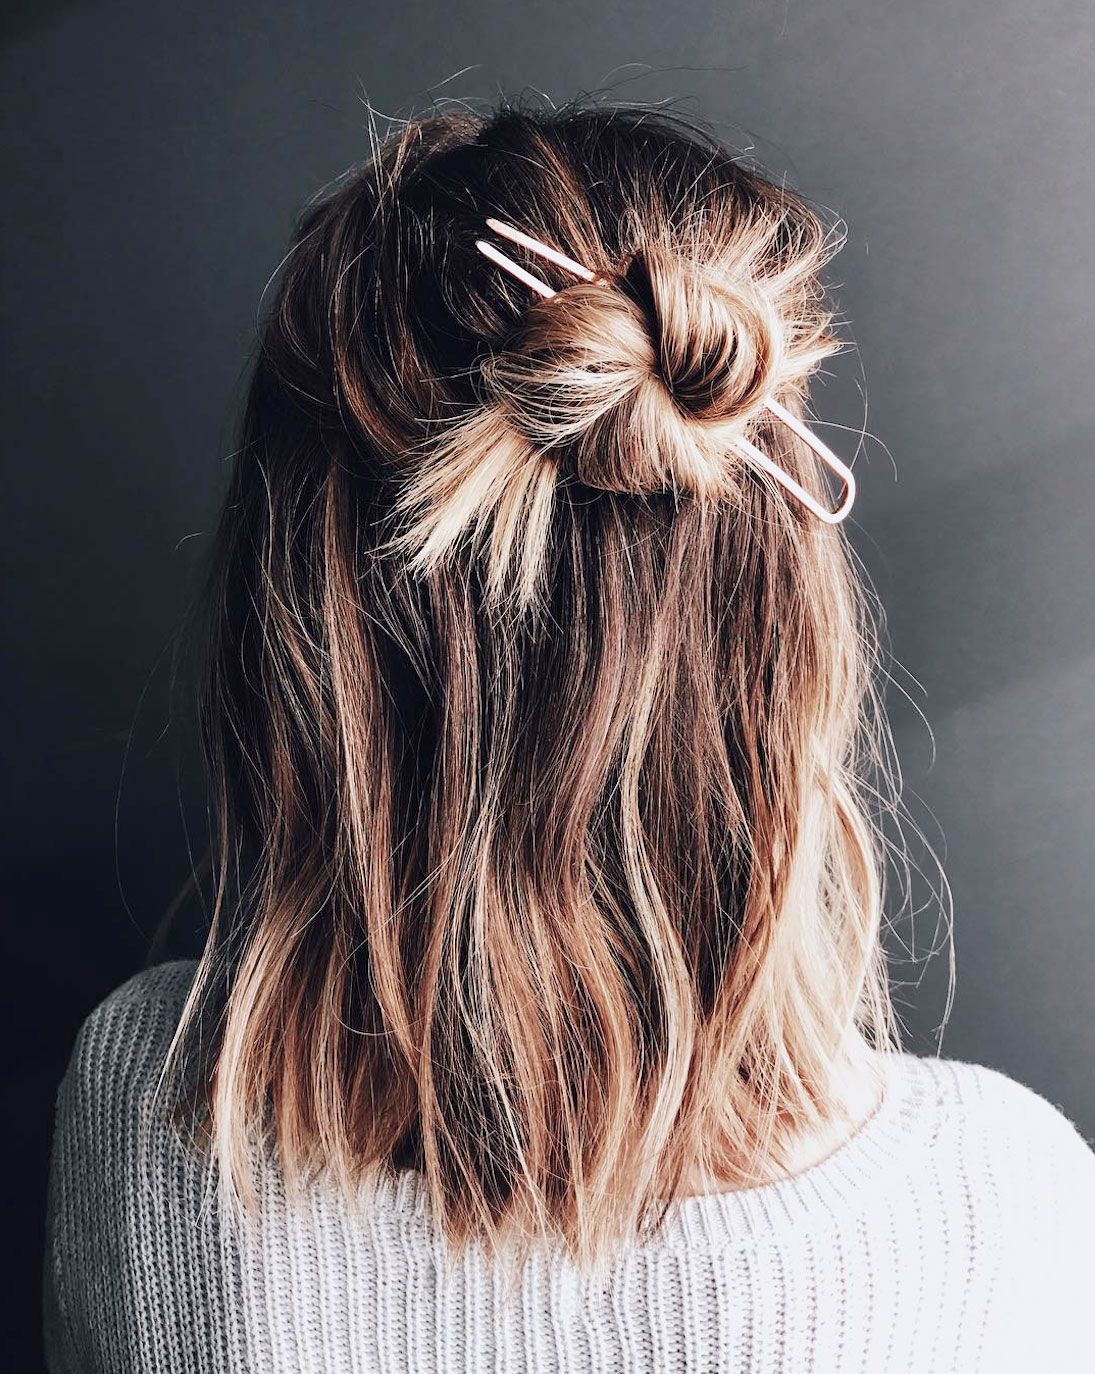 24 Half Up Half Down Bun Hairstyles To Try in 2021 | All Things Hair US